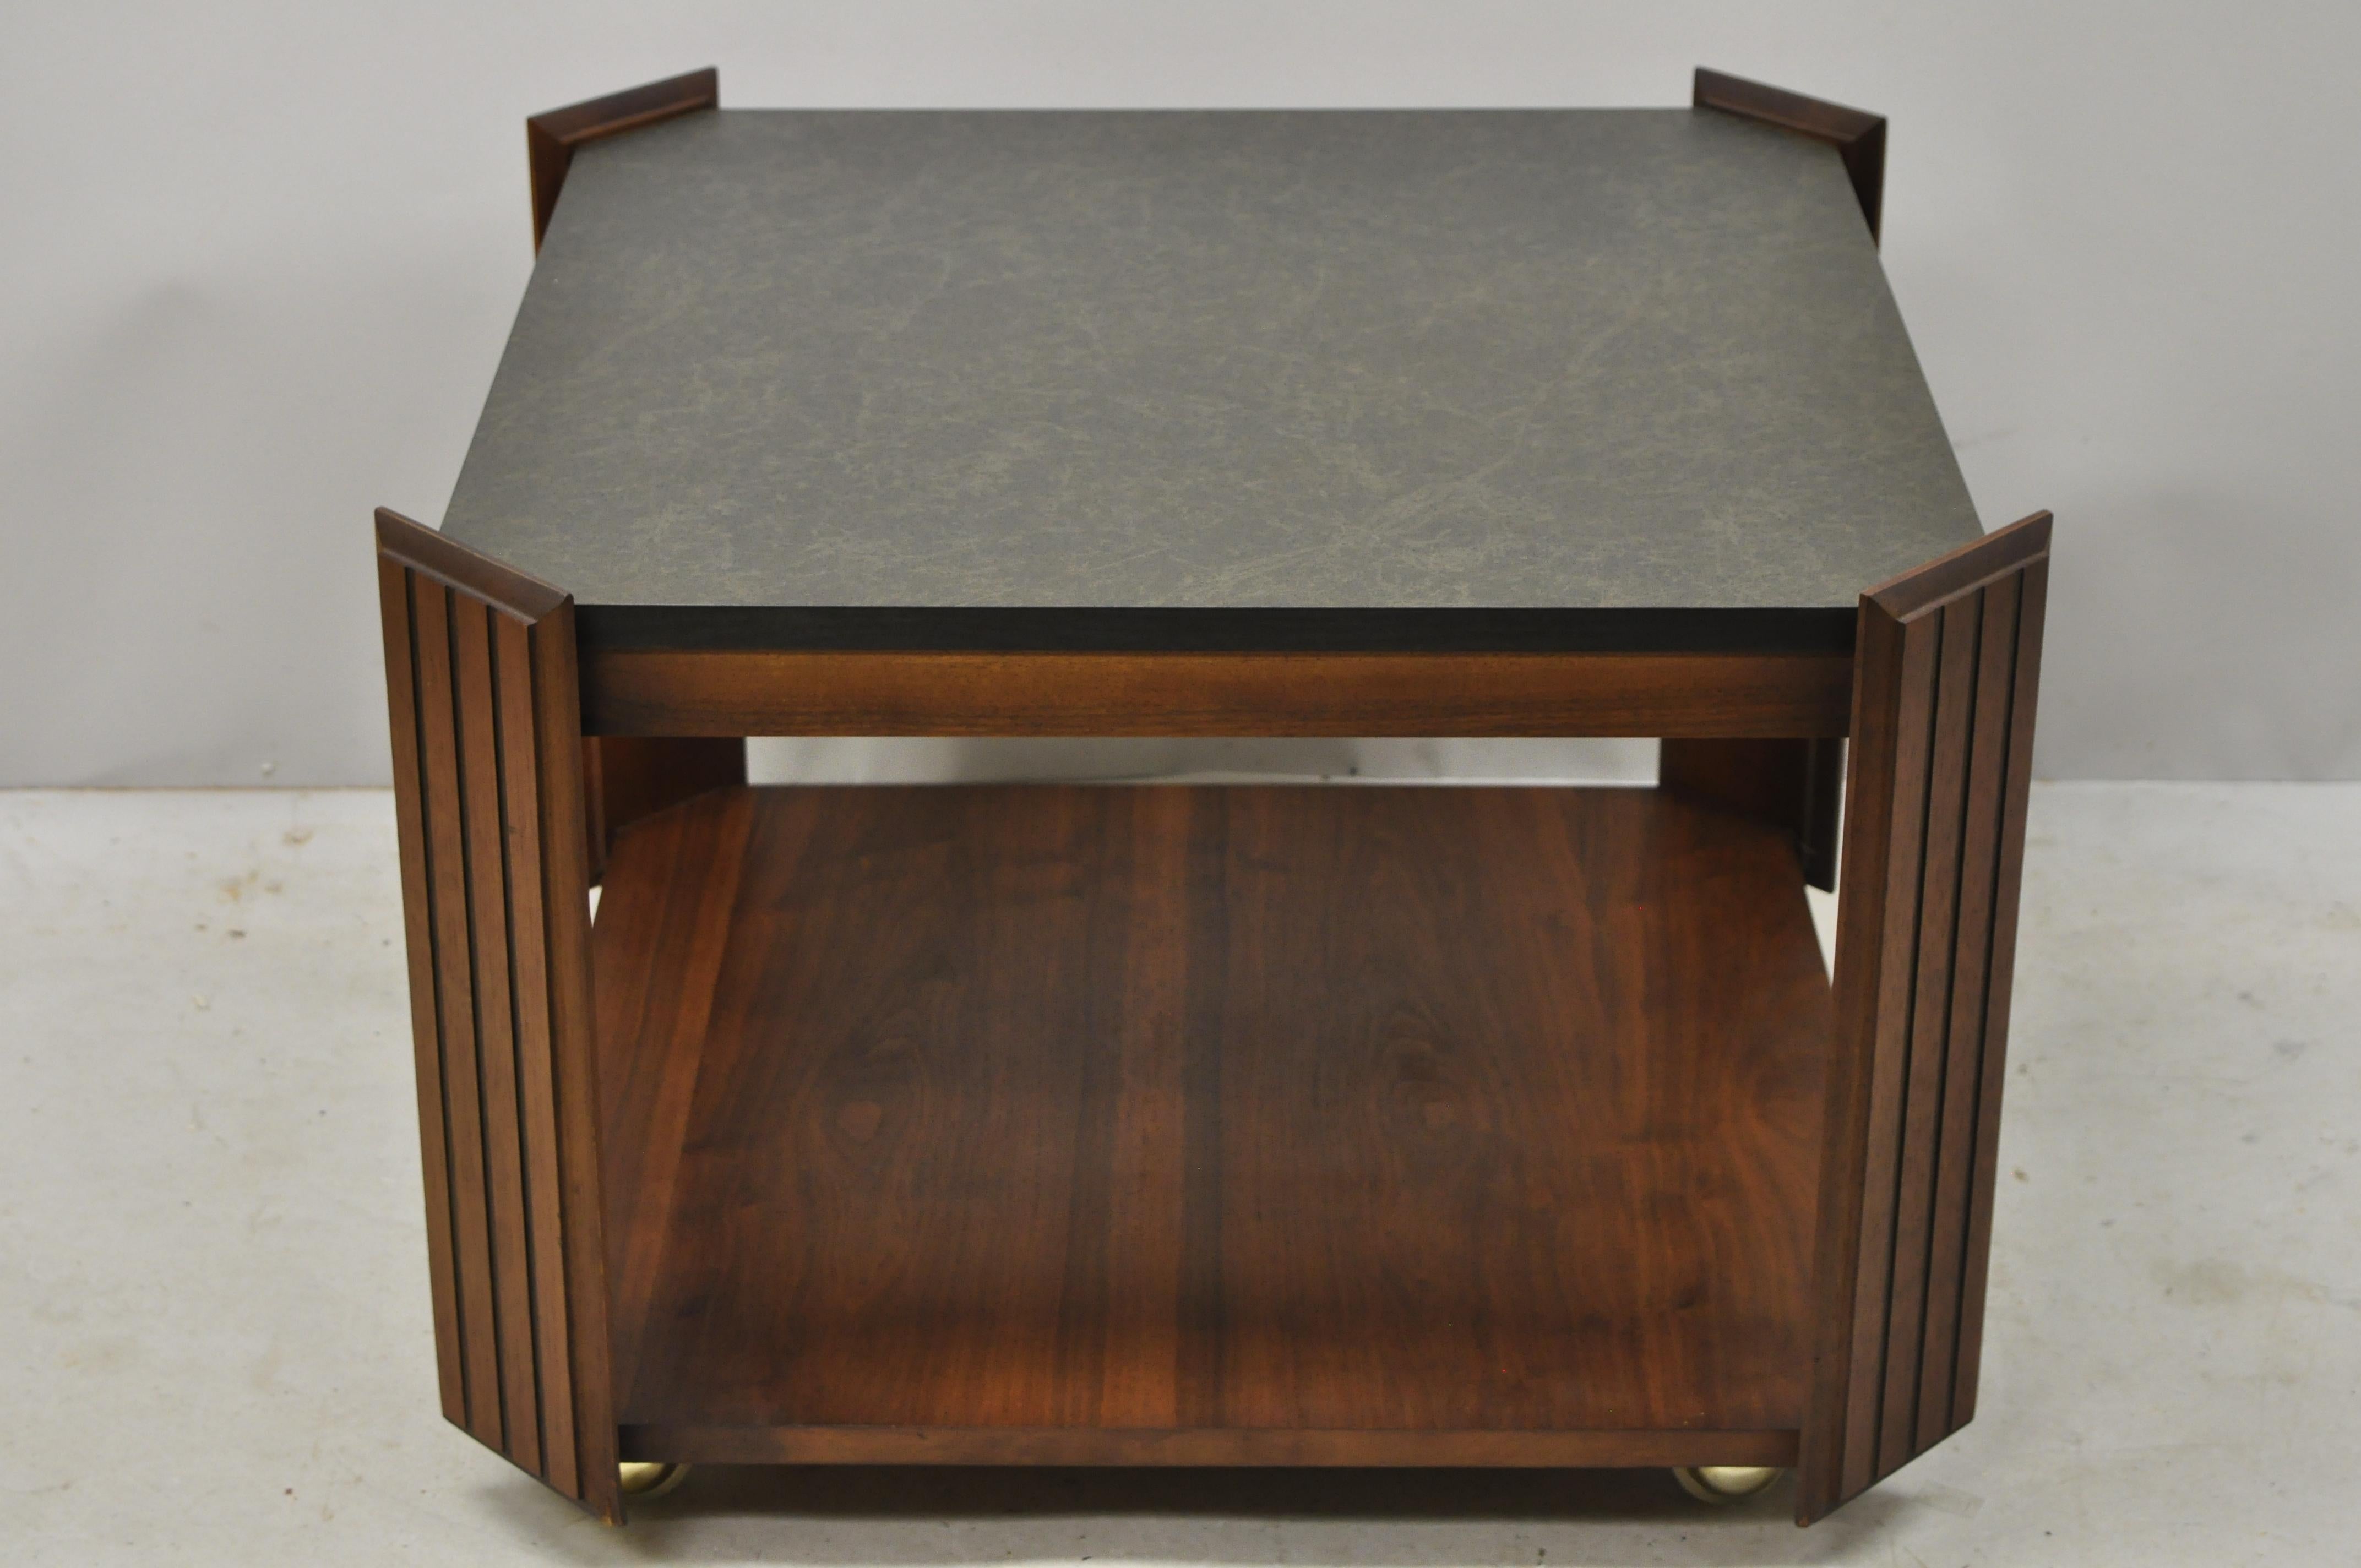 Vintage lane Altavista Mid-Century Modern walnut square rolling side coffee table. Item features rolling casters, laminate top, beautiful wood grain, nicely carved details, original stamp, clean modernist lines, quality American craftsmanship, circa